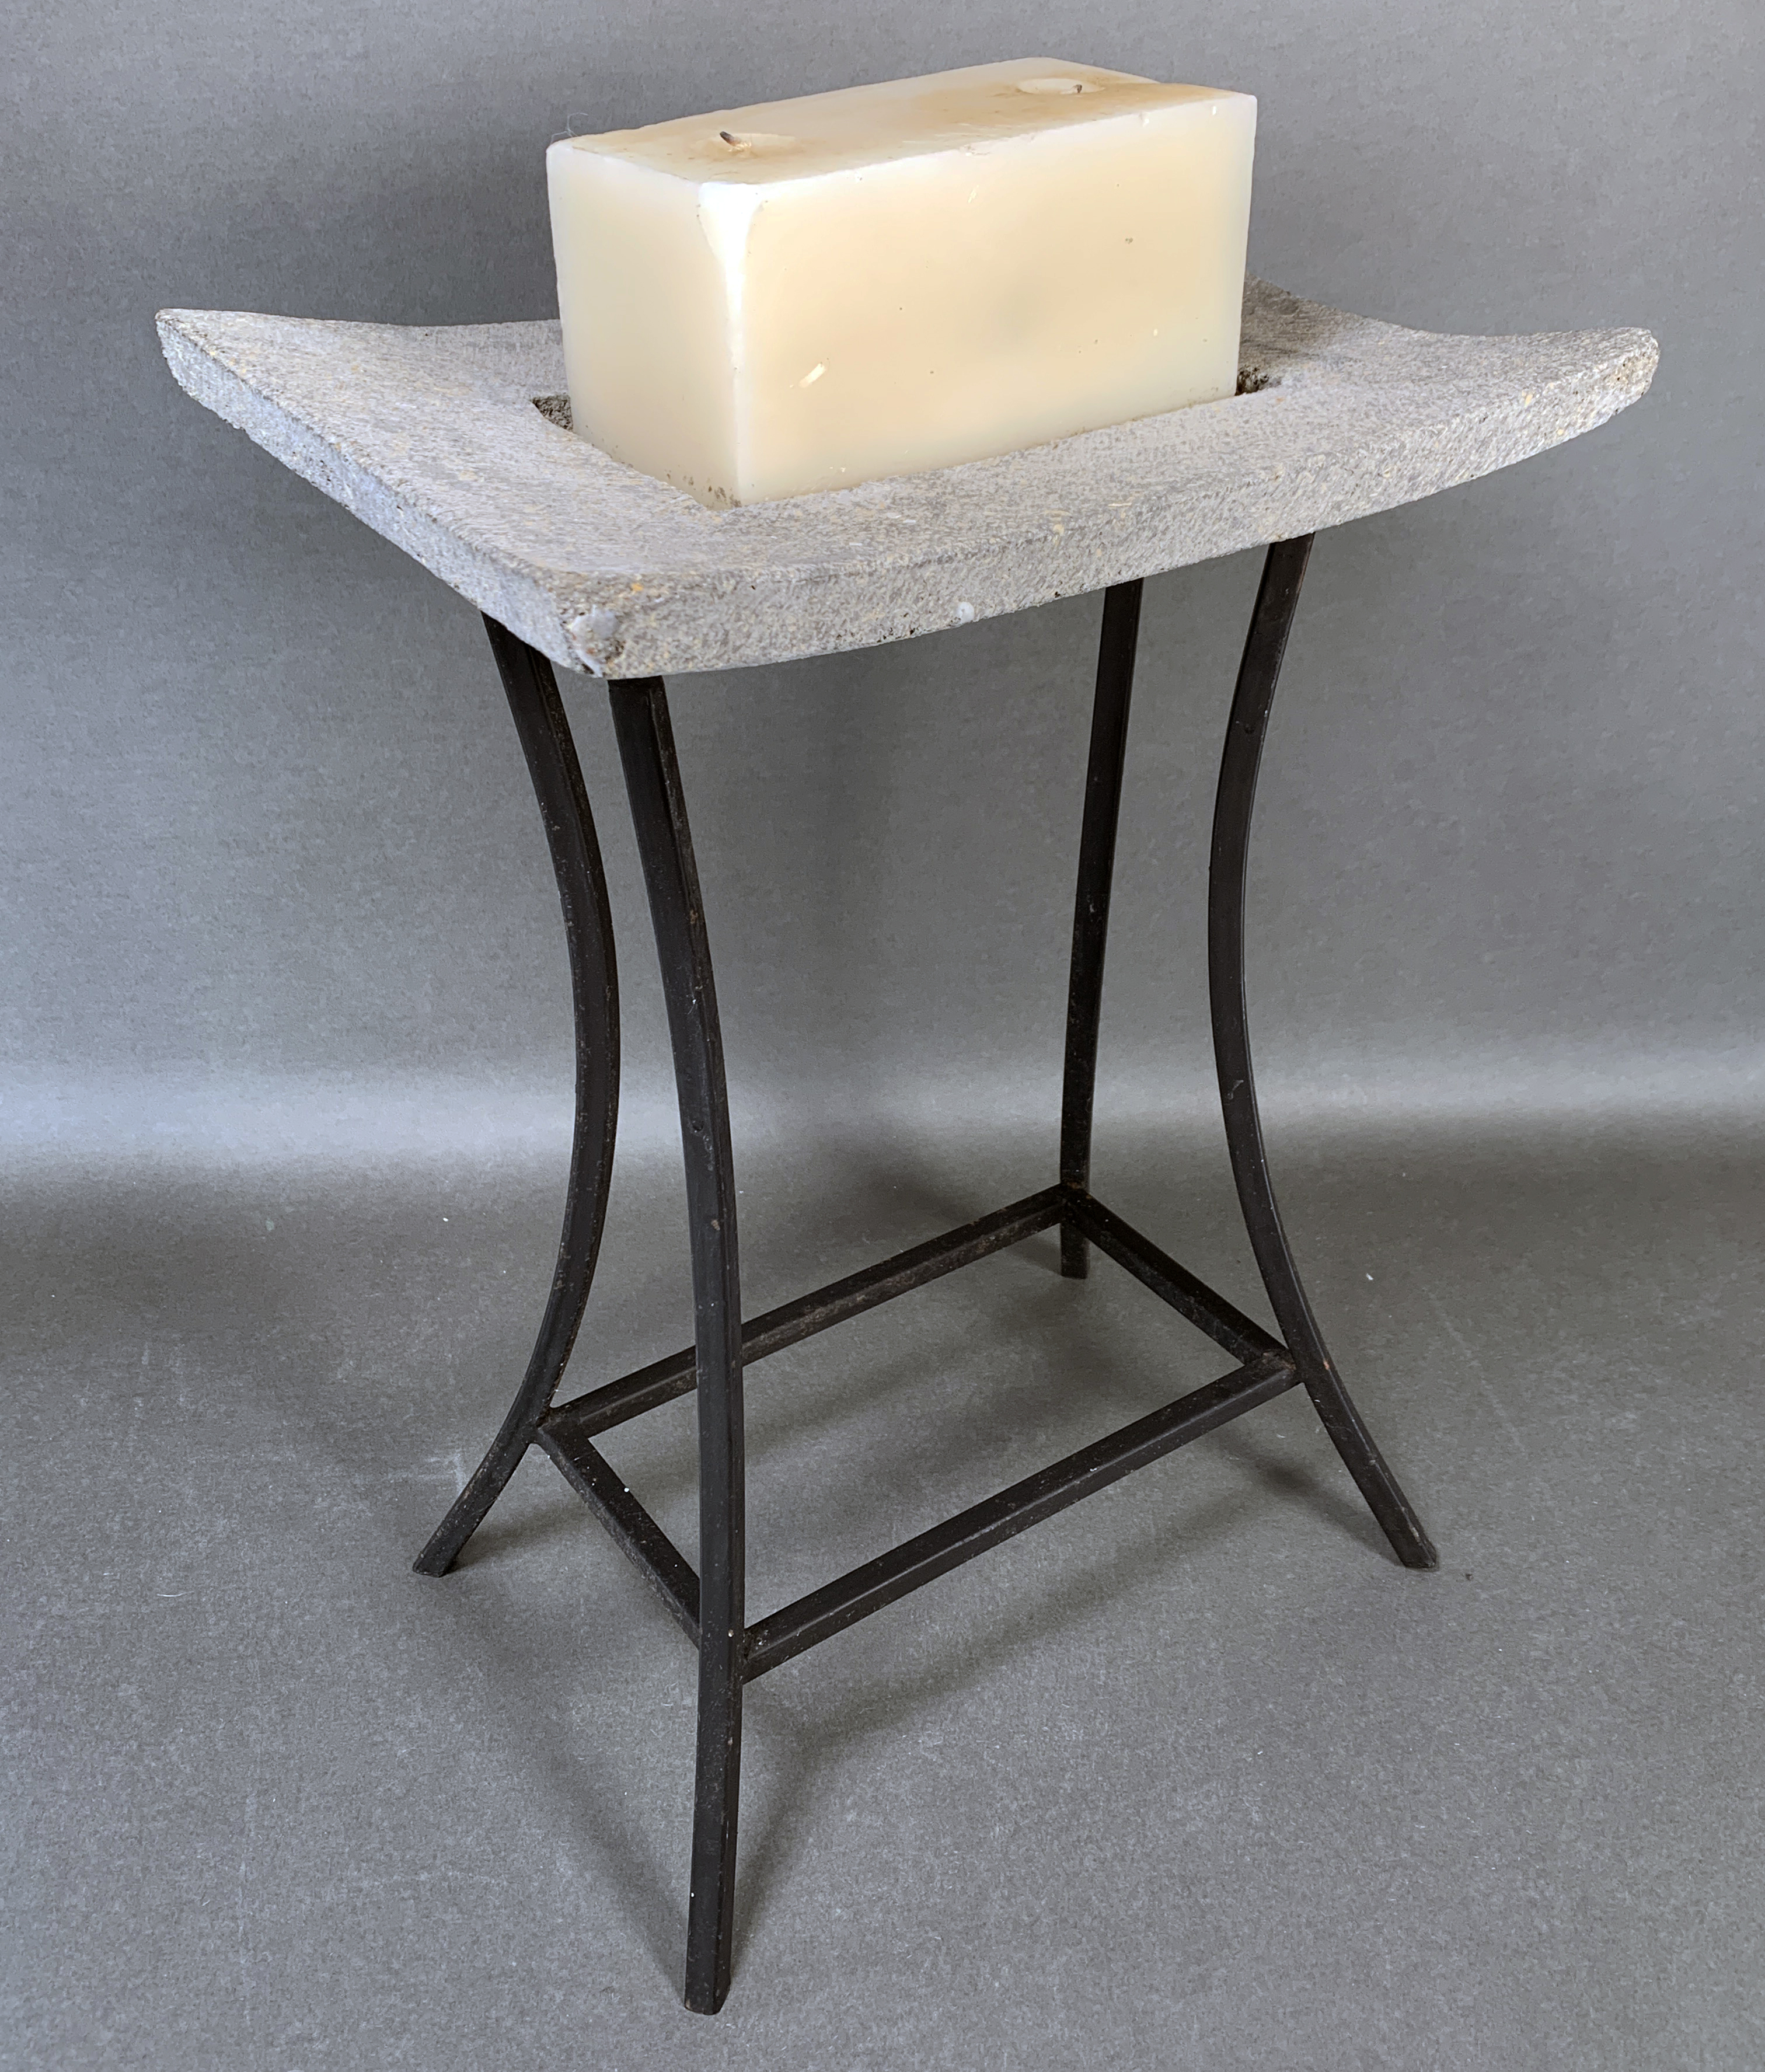 Tall Metal Stand Candle Holder image 1